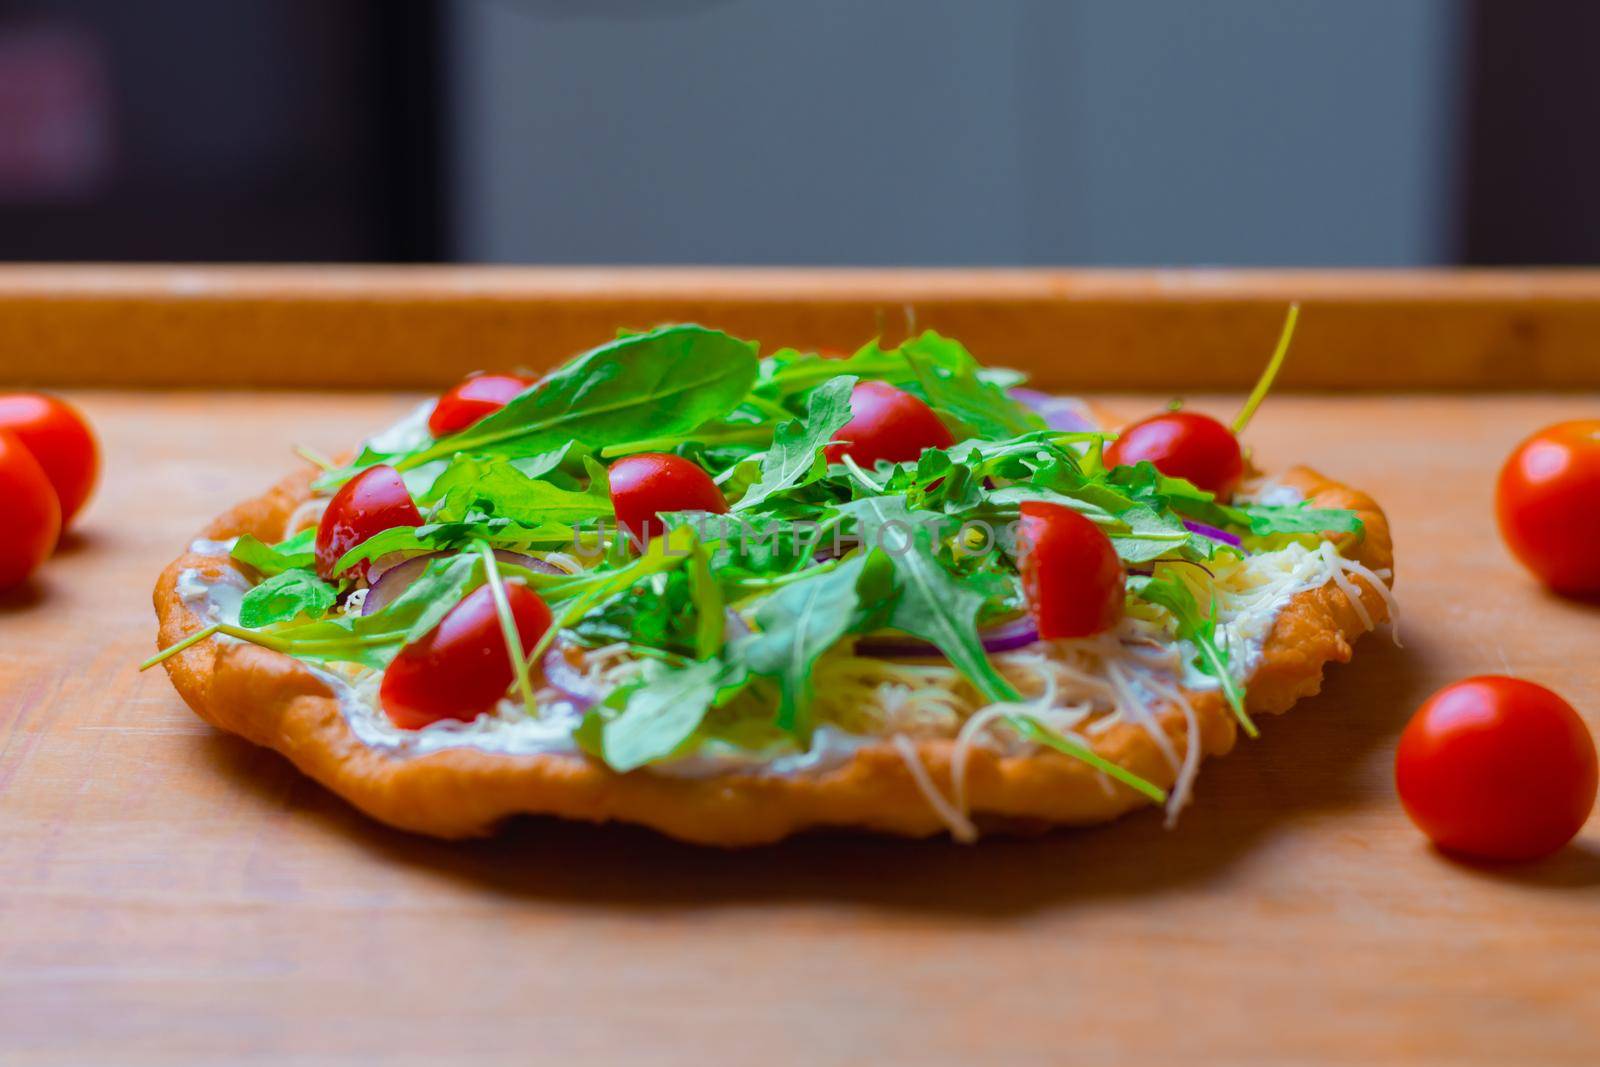 Tomato And Arugula Style Langos - Hungarian specialty by banate